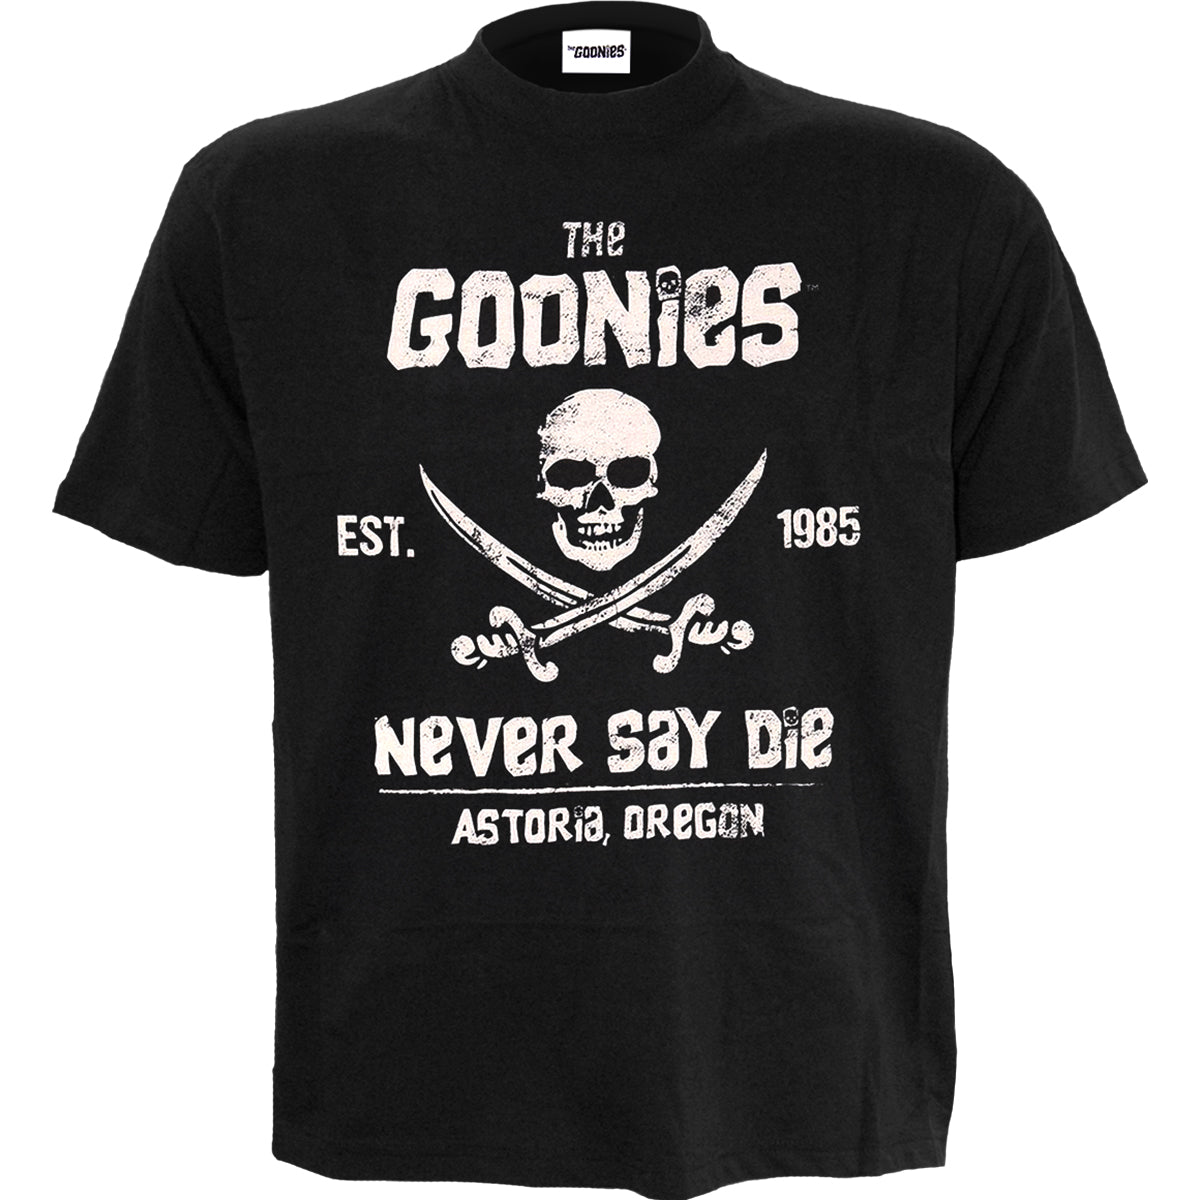 THE GOONIES - NEVER SAY DIE - Front Print T-Shirt Black